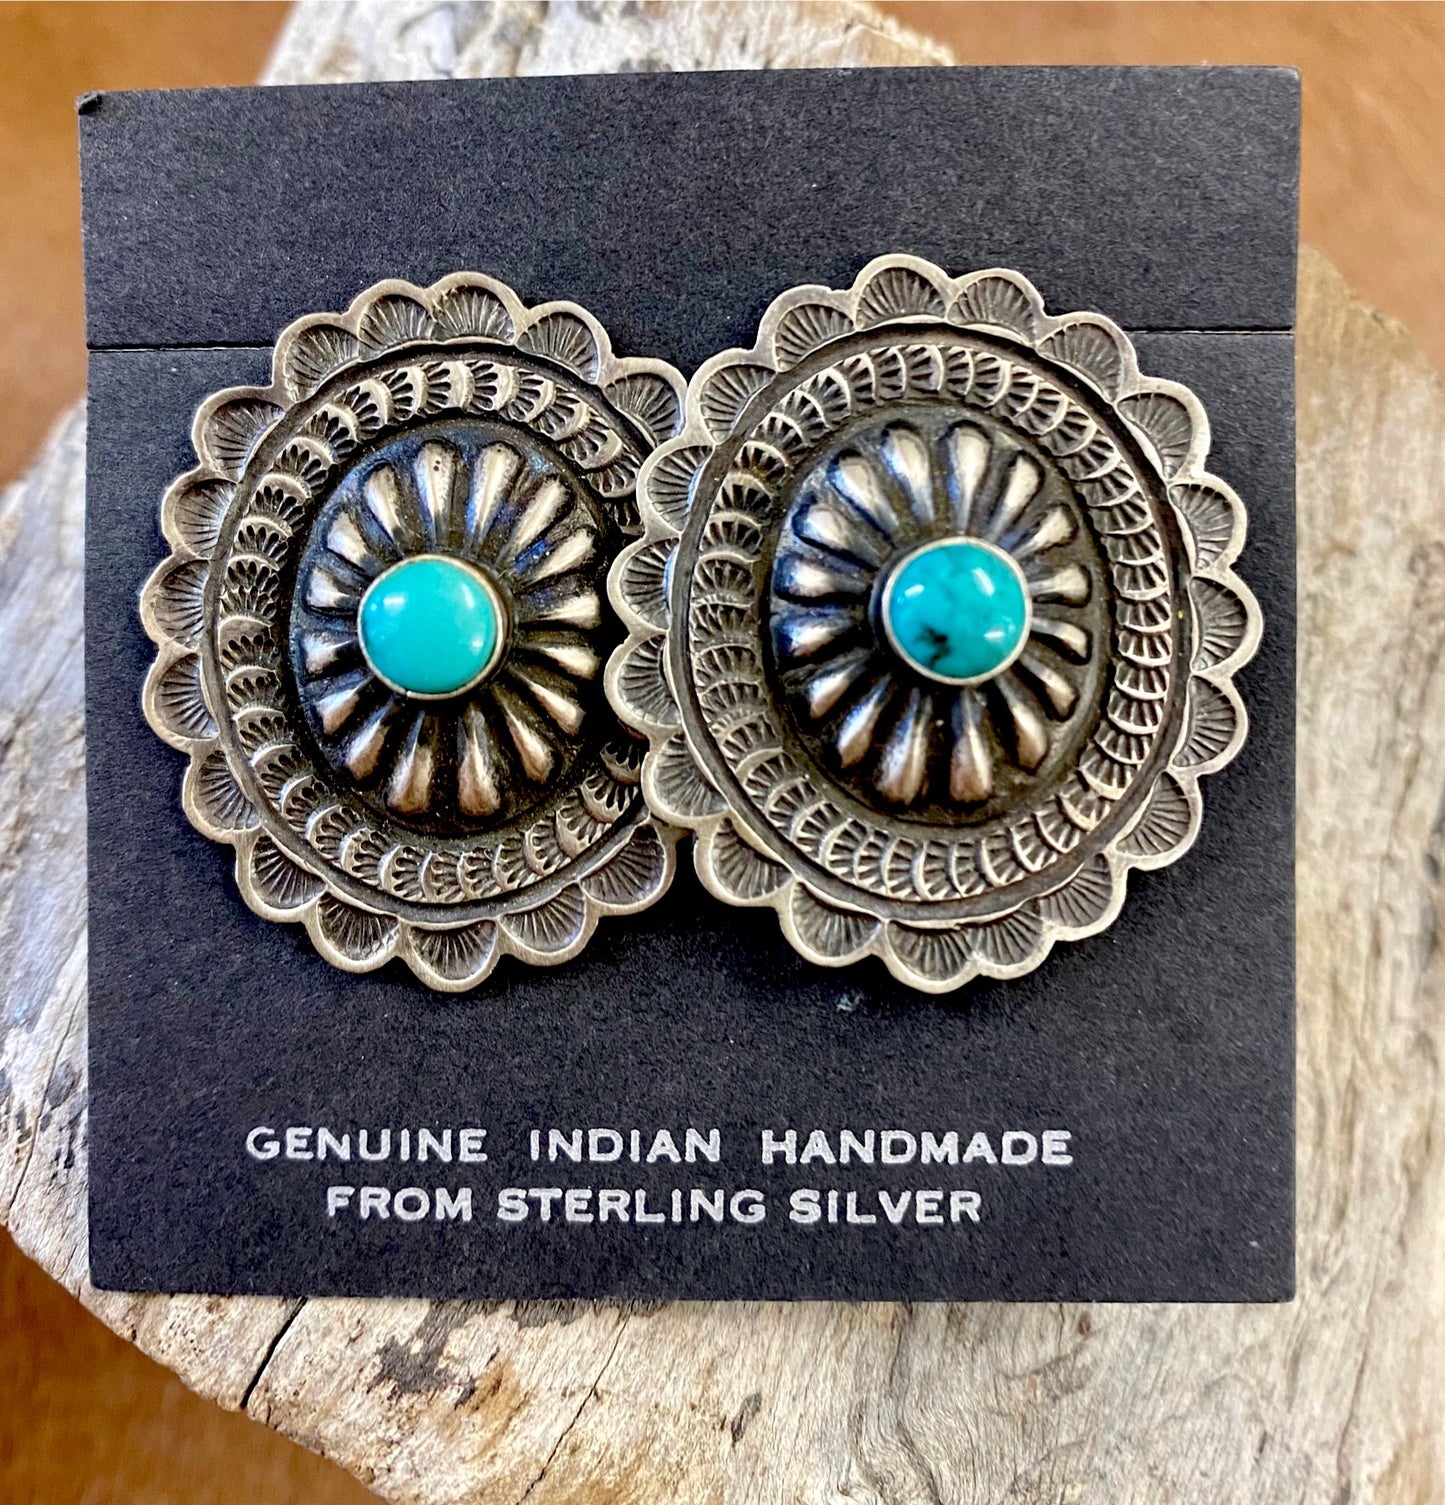 Native American Made Sterling Silver Concho Earrings With Turquoise Authentic large post concho style sterling silver earrings with turquoise. Stamped sterling and signed by Native American artist silversmith on the back inside the indent of the earrings. 